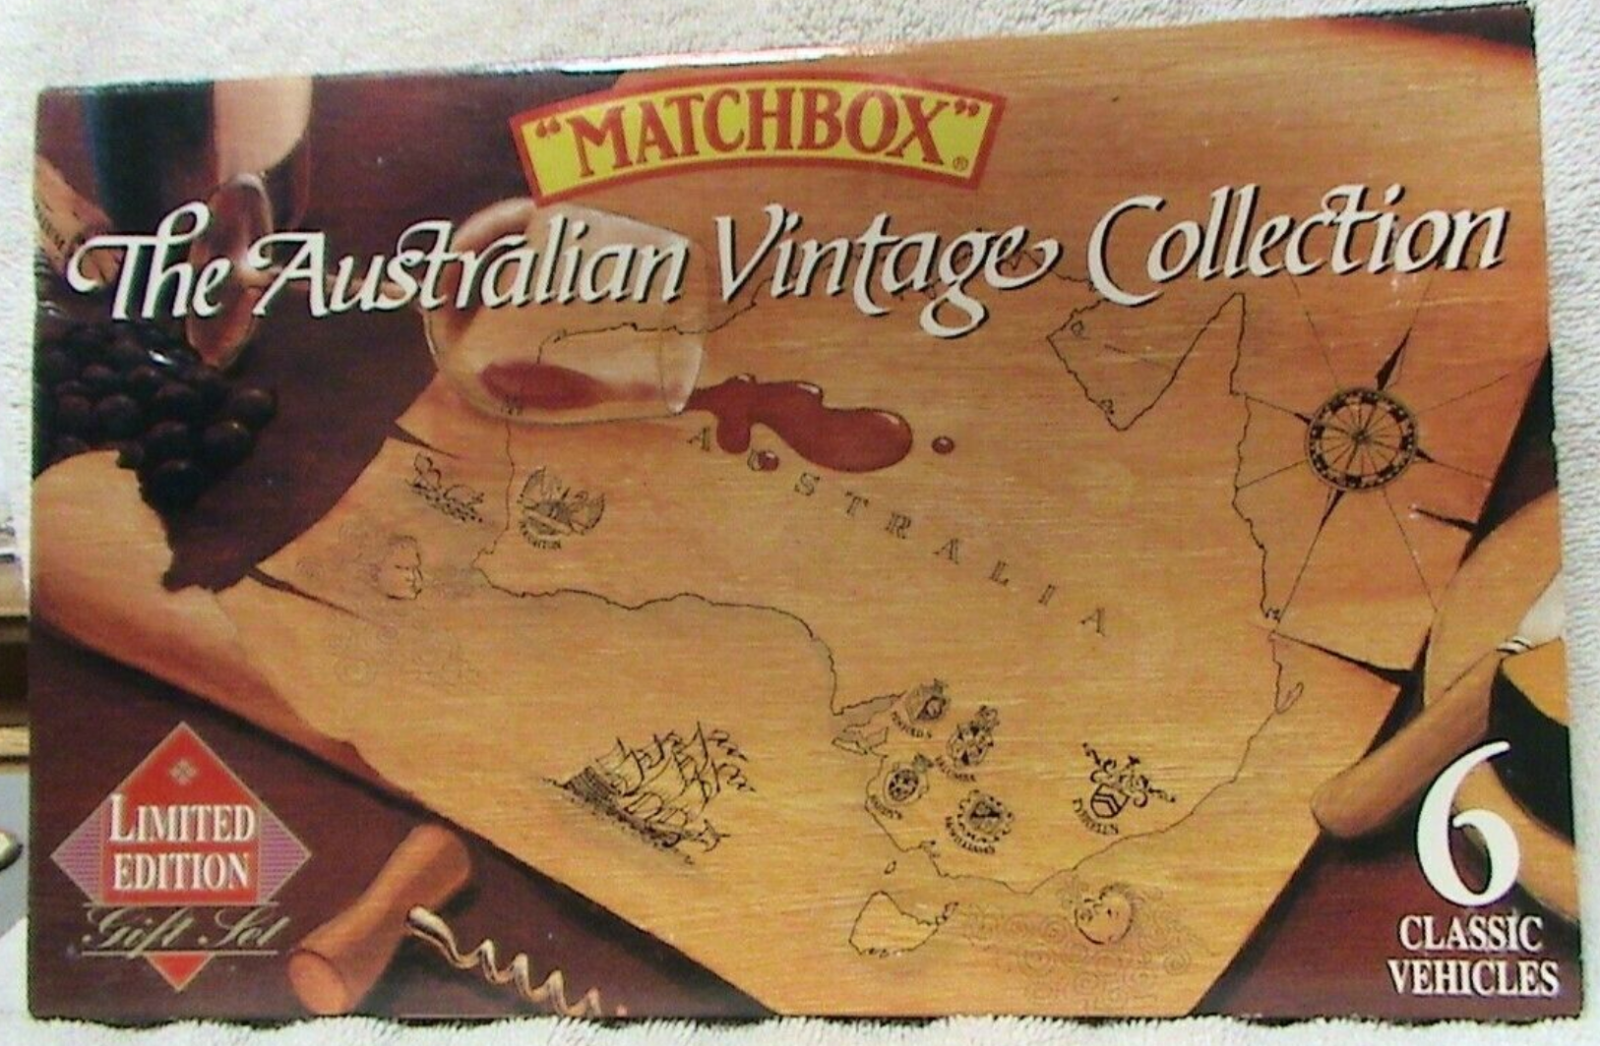 Primary image for MB 0913 Matchbox Australian Vintage Wines Collection 6 Pack Gift Set Limited Ed